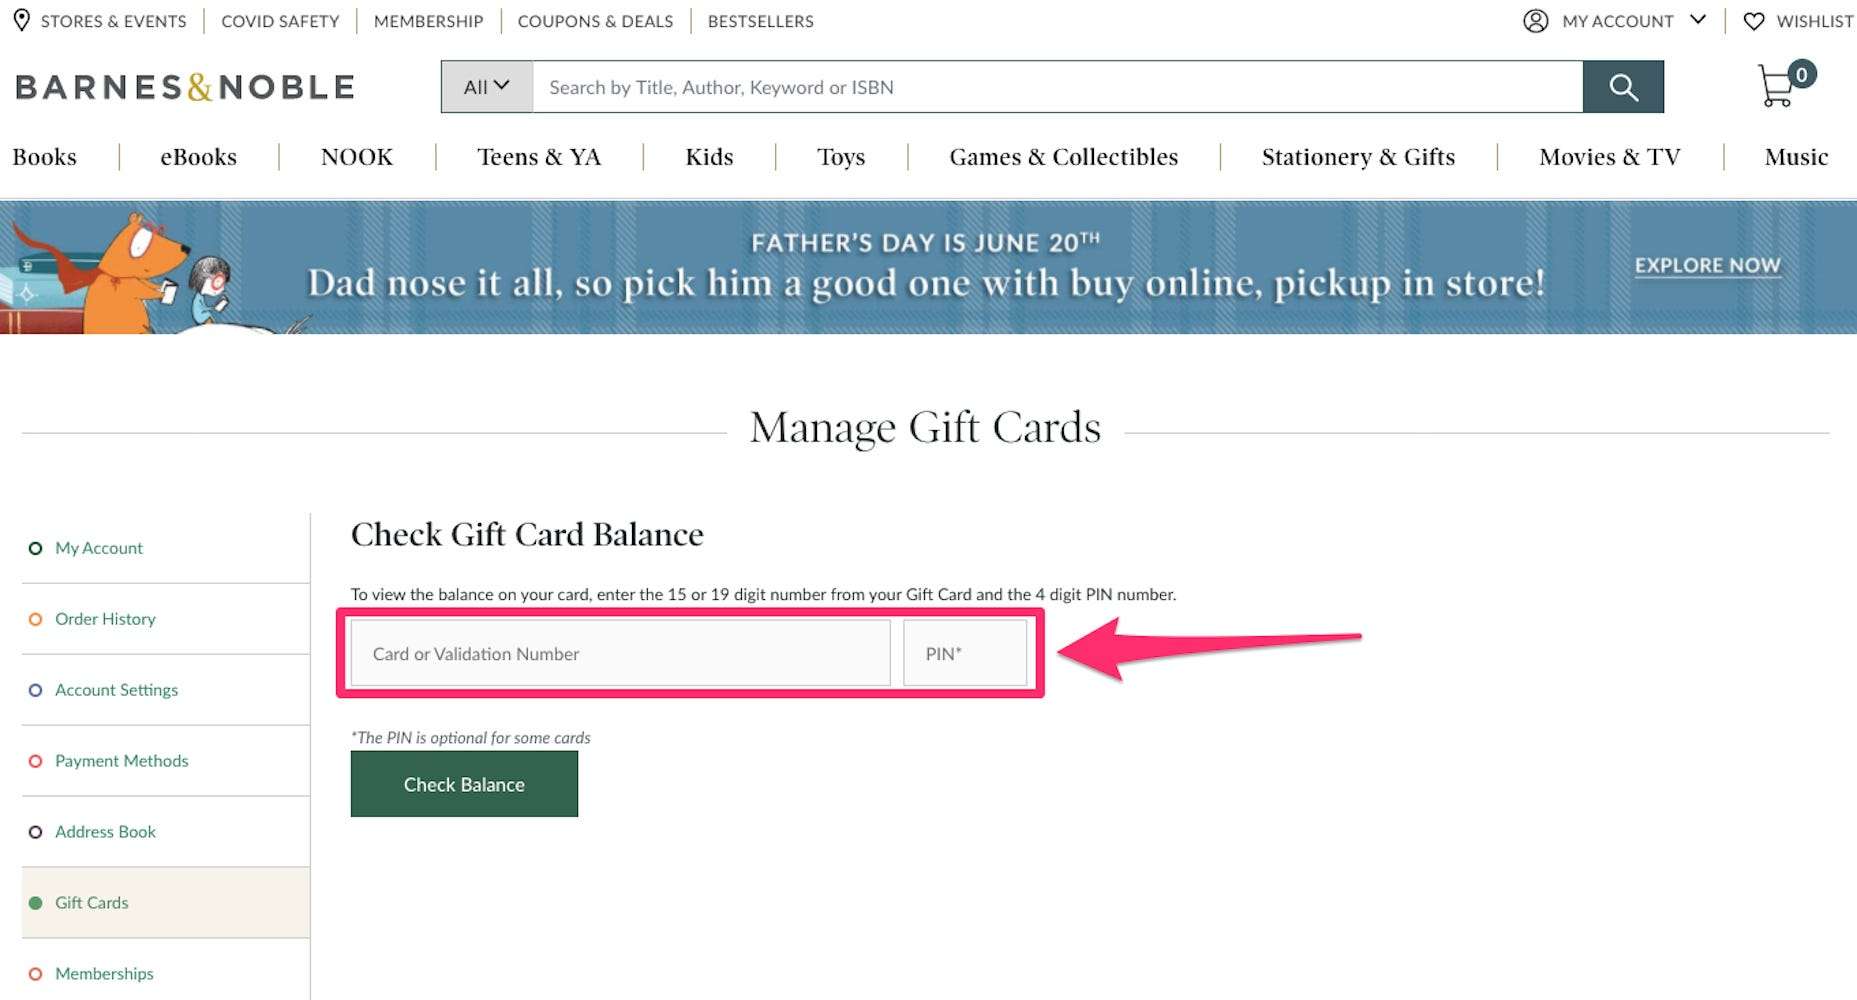 How to check a Barnes & Noble gift card balance in 3 ways